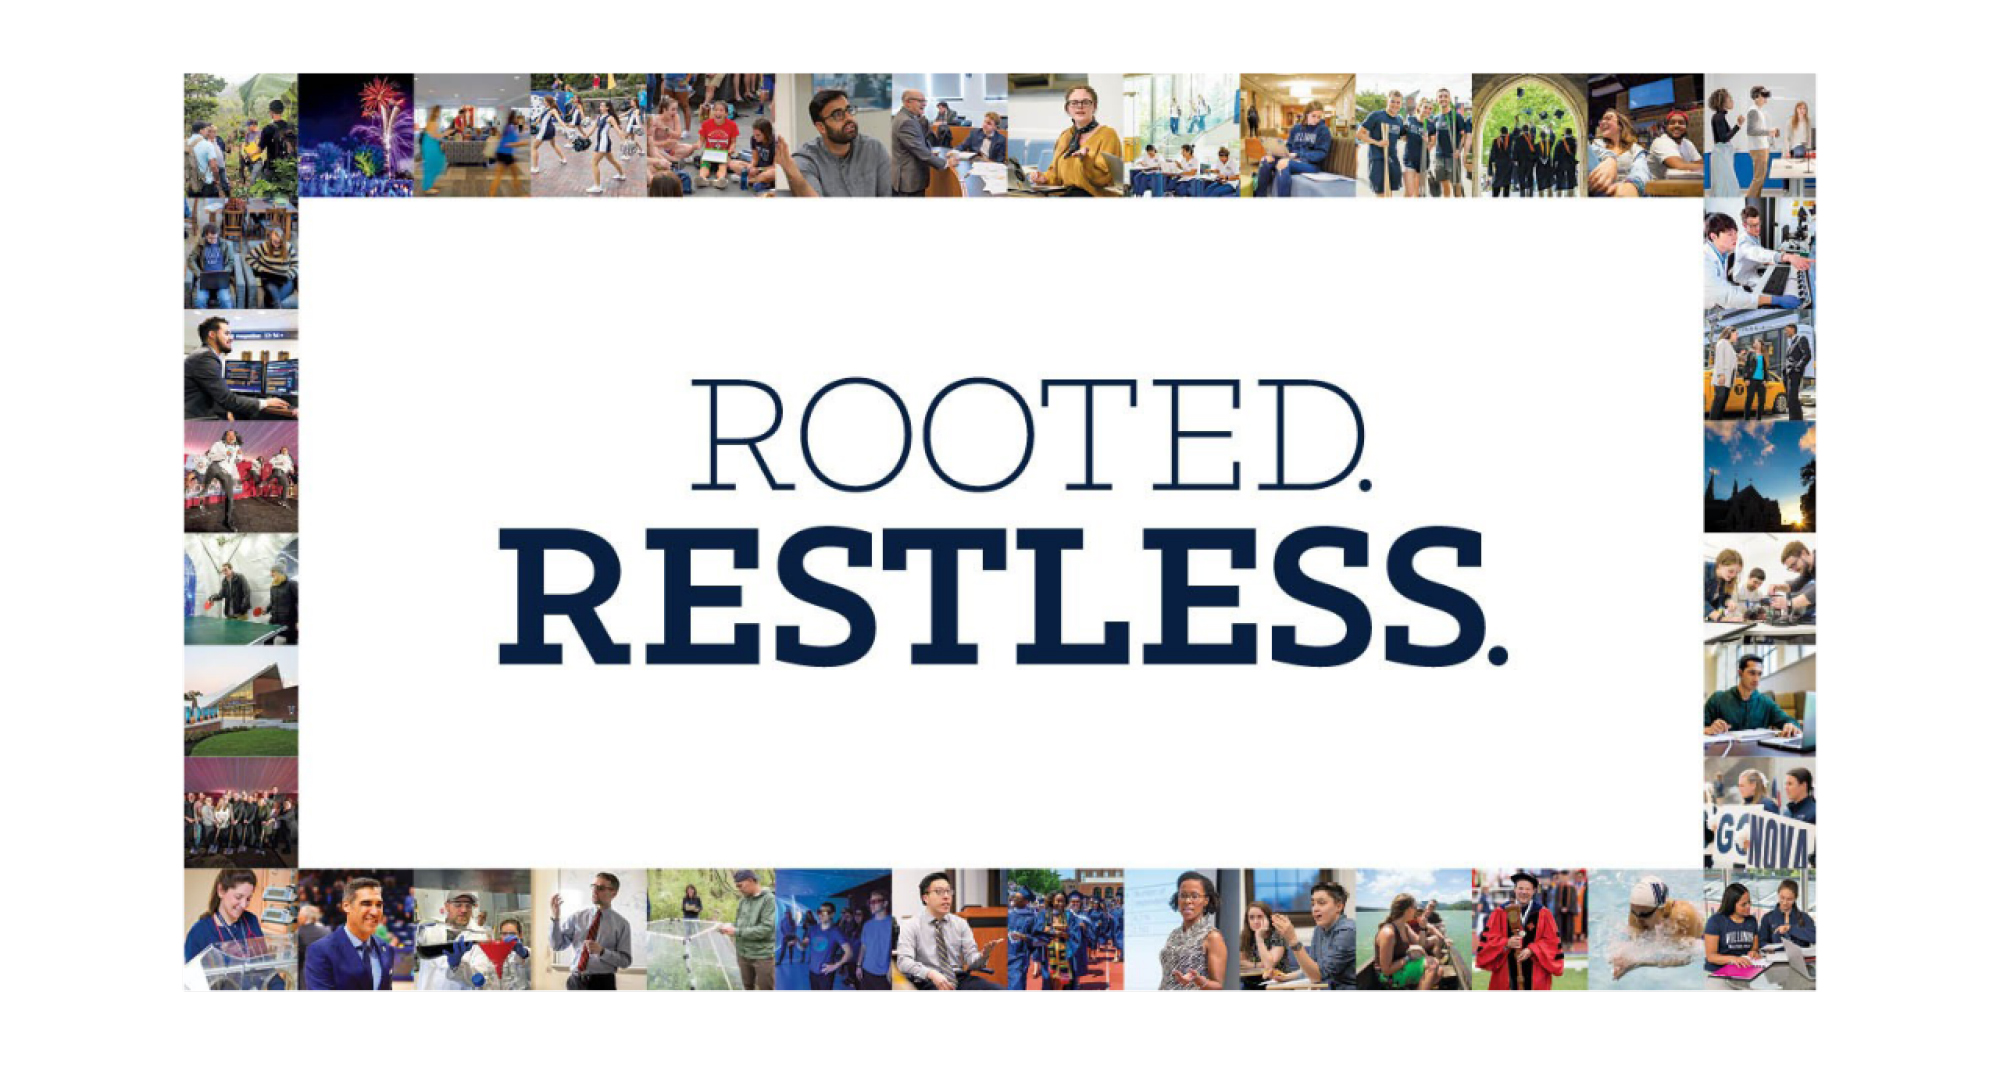 A text treatment of the words "Rooted. Restless." surrounding by numerous photos of Villanova University faculty, students and leadership